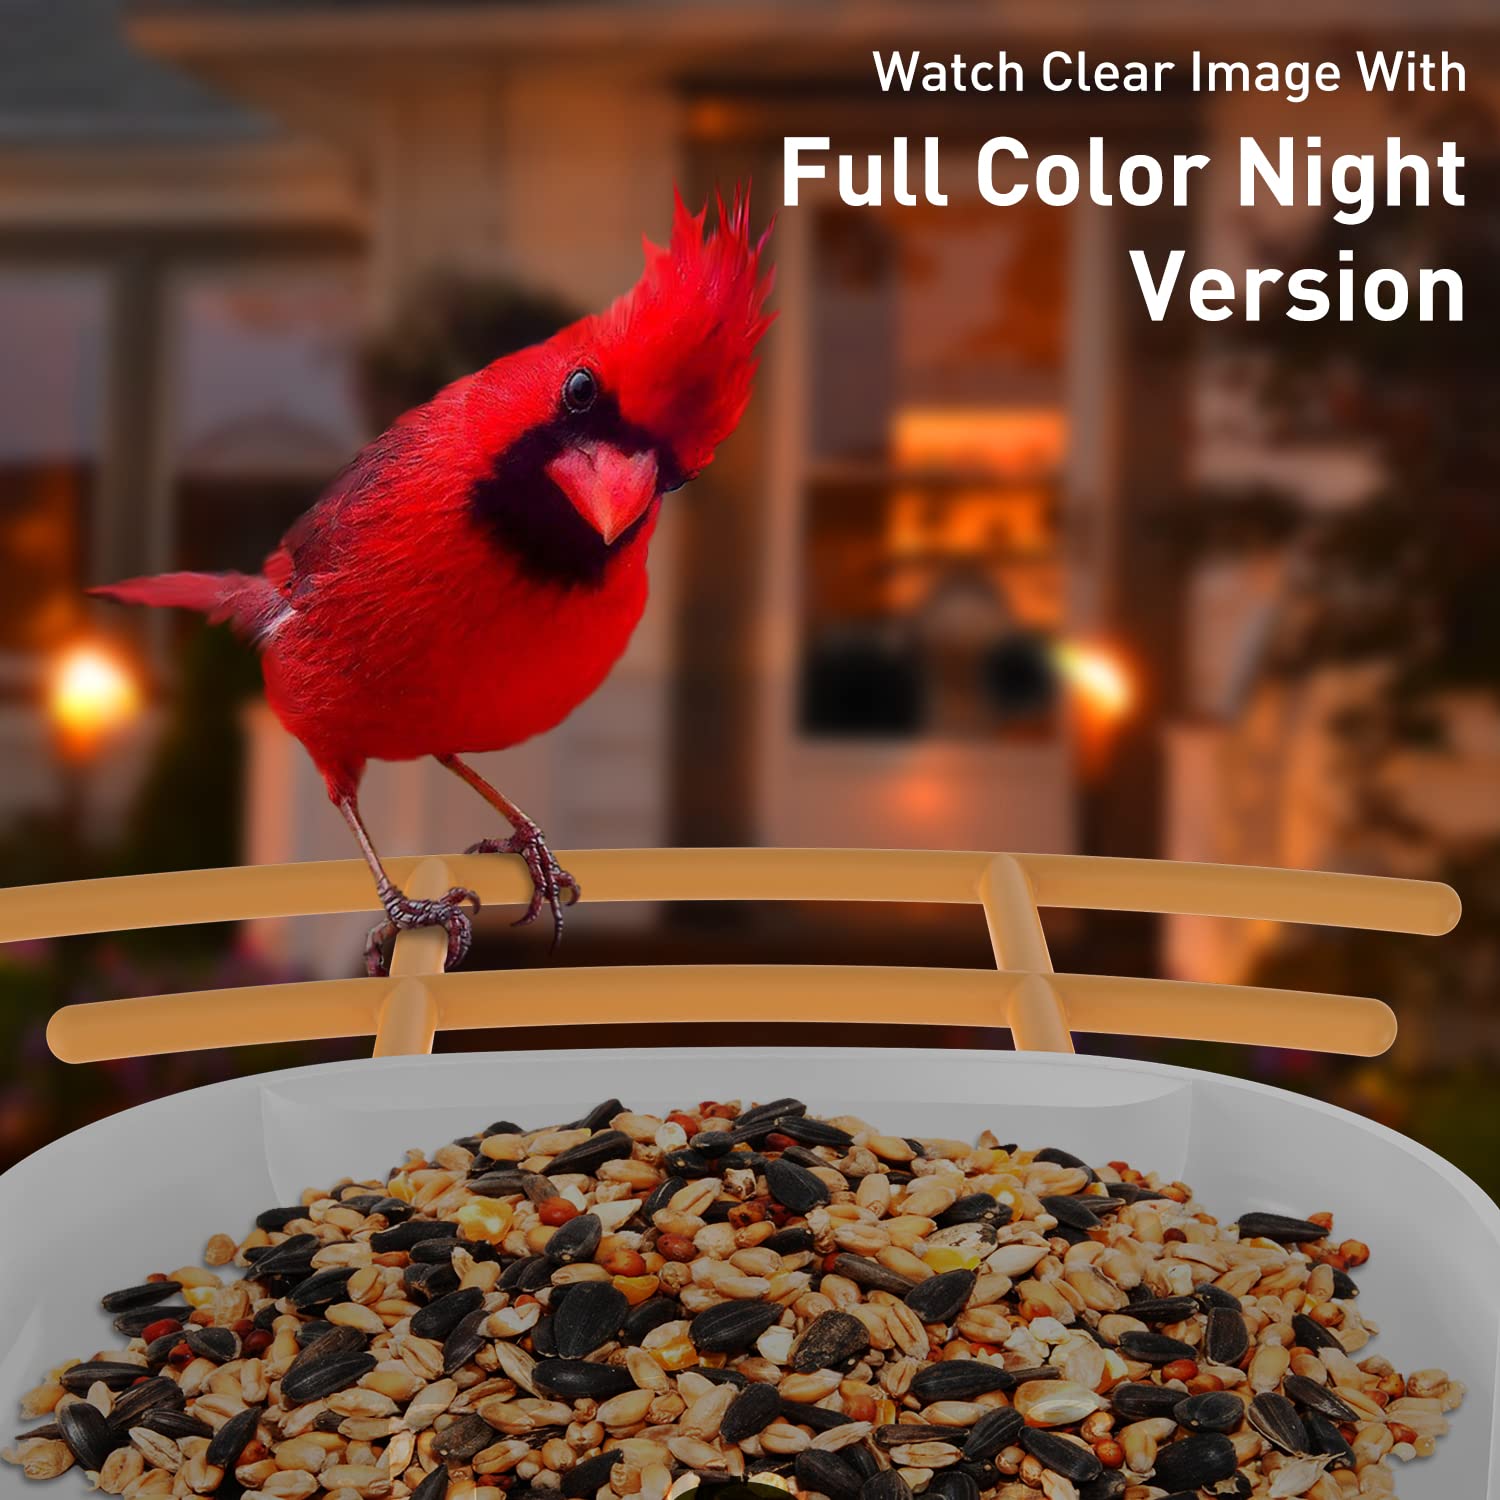 Soliom BF09-Bird Feeder with Camera Wireless Outdoor,Auto Record Bird Video, Instant Notifications, 5W Solar Panel and 32GB SD Card